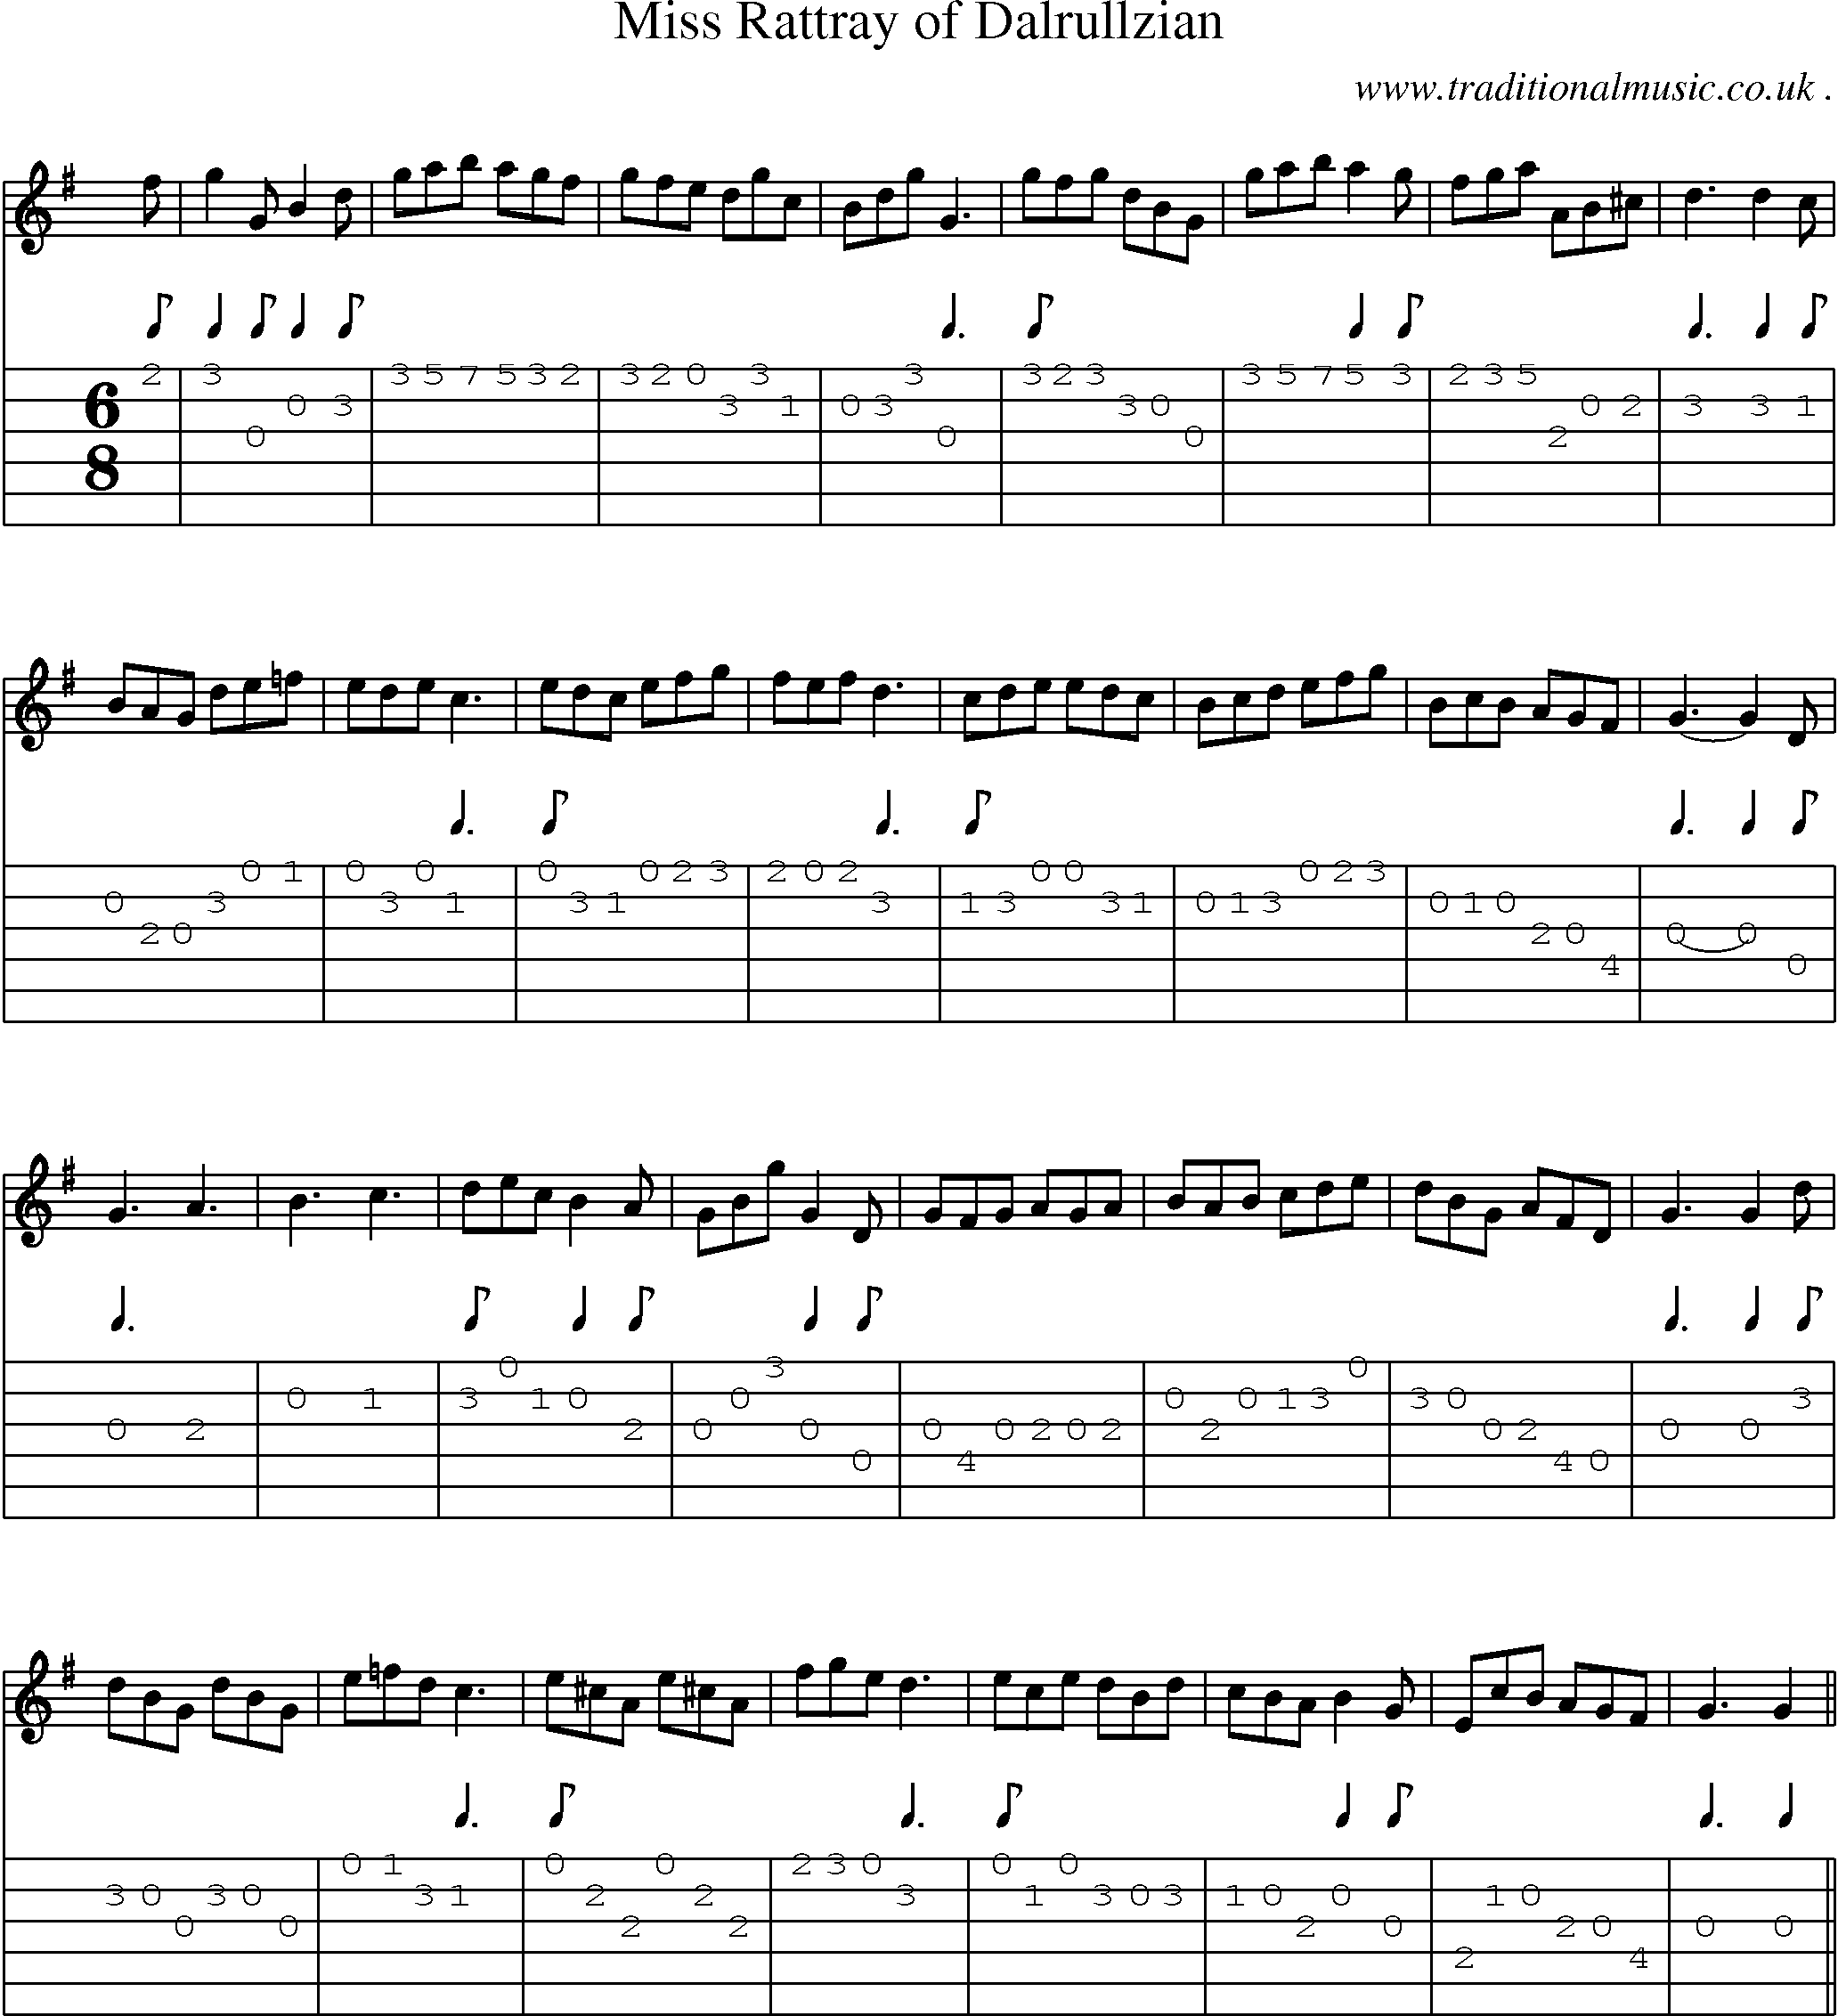 Sheet-music  score, Chords and Guitar Tabs for Miss Rattray Of Dalrullzian